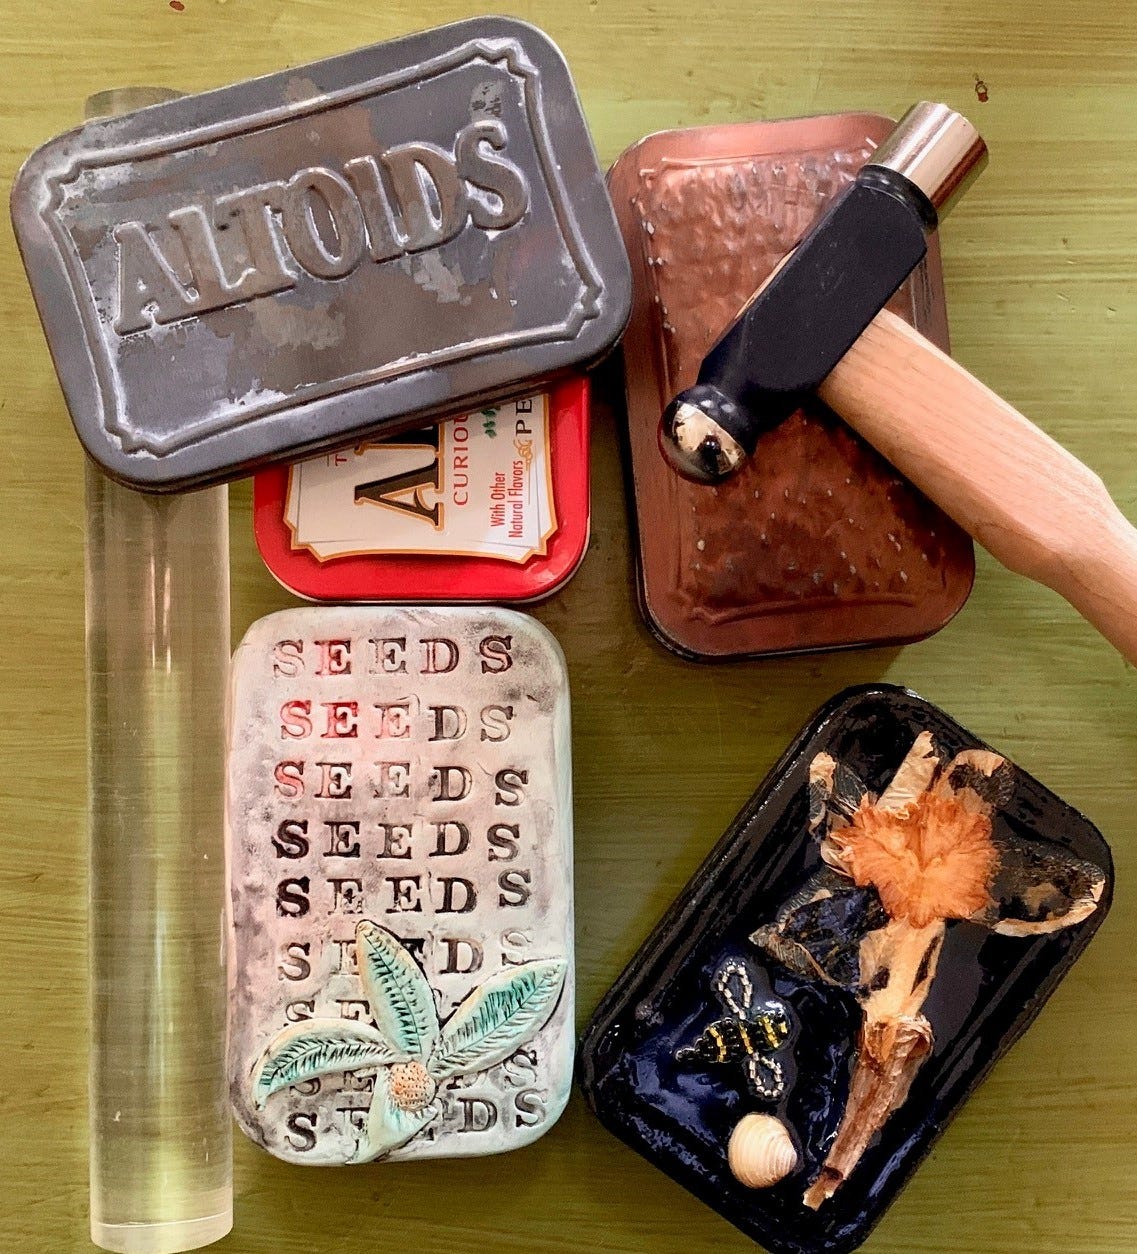 Three Ways to “Un-Altoids” a Tin: Hammering, Decoupage, and Polymer Clay, by Amy Lynn Hess, Share Your Creativity